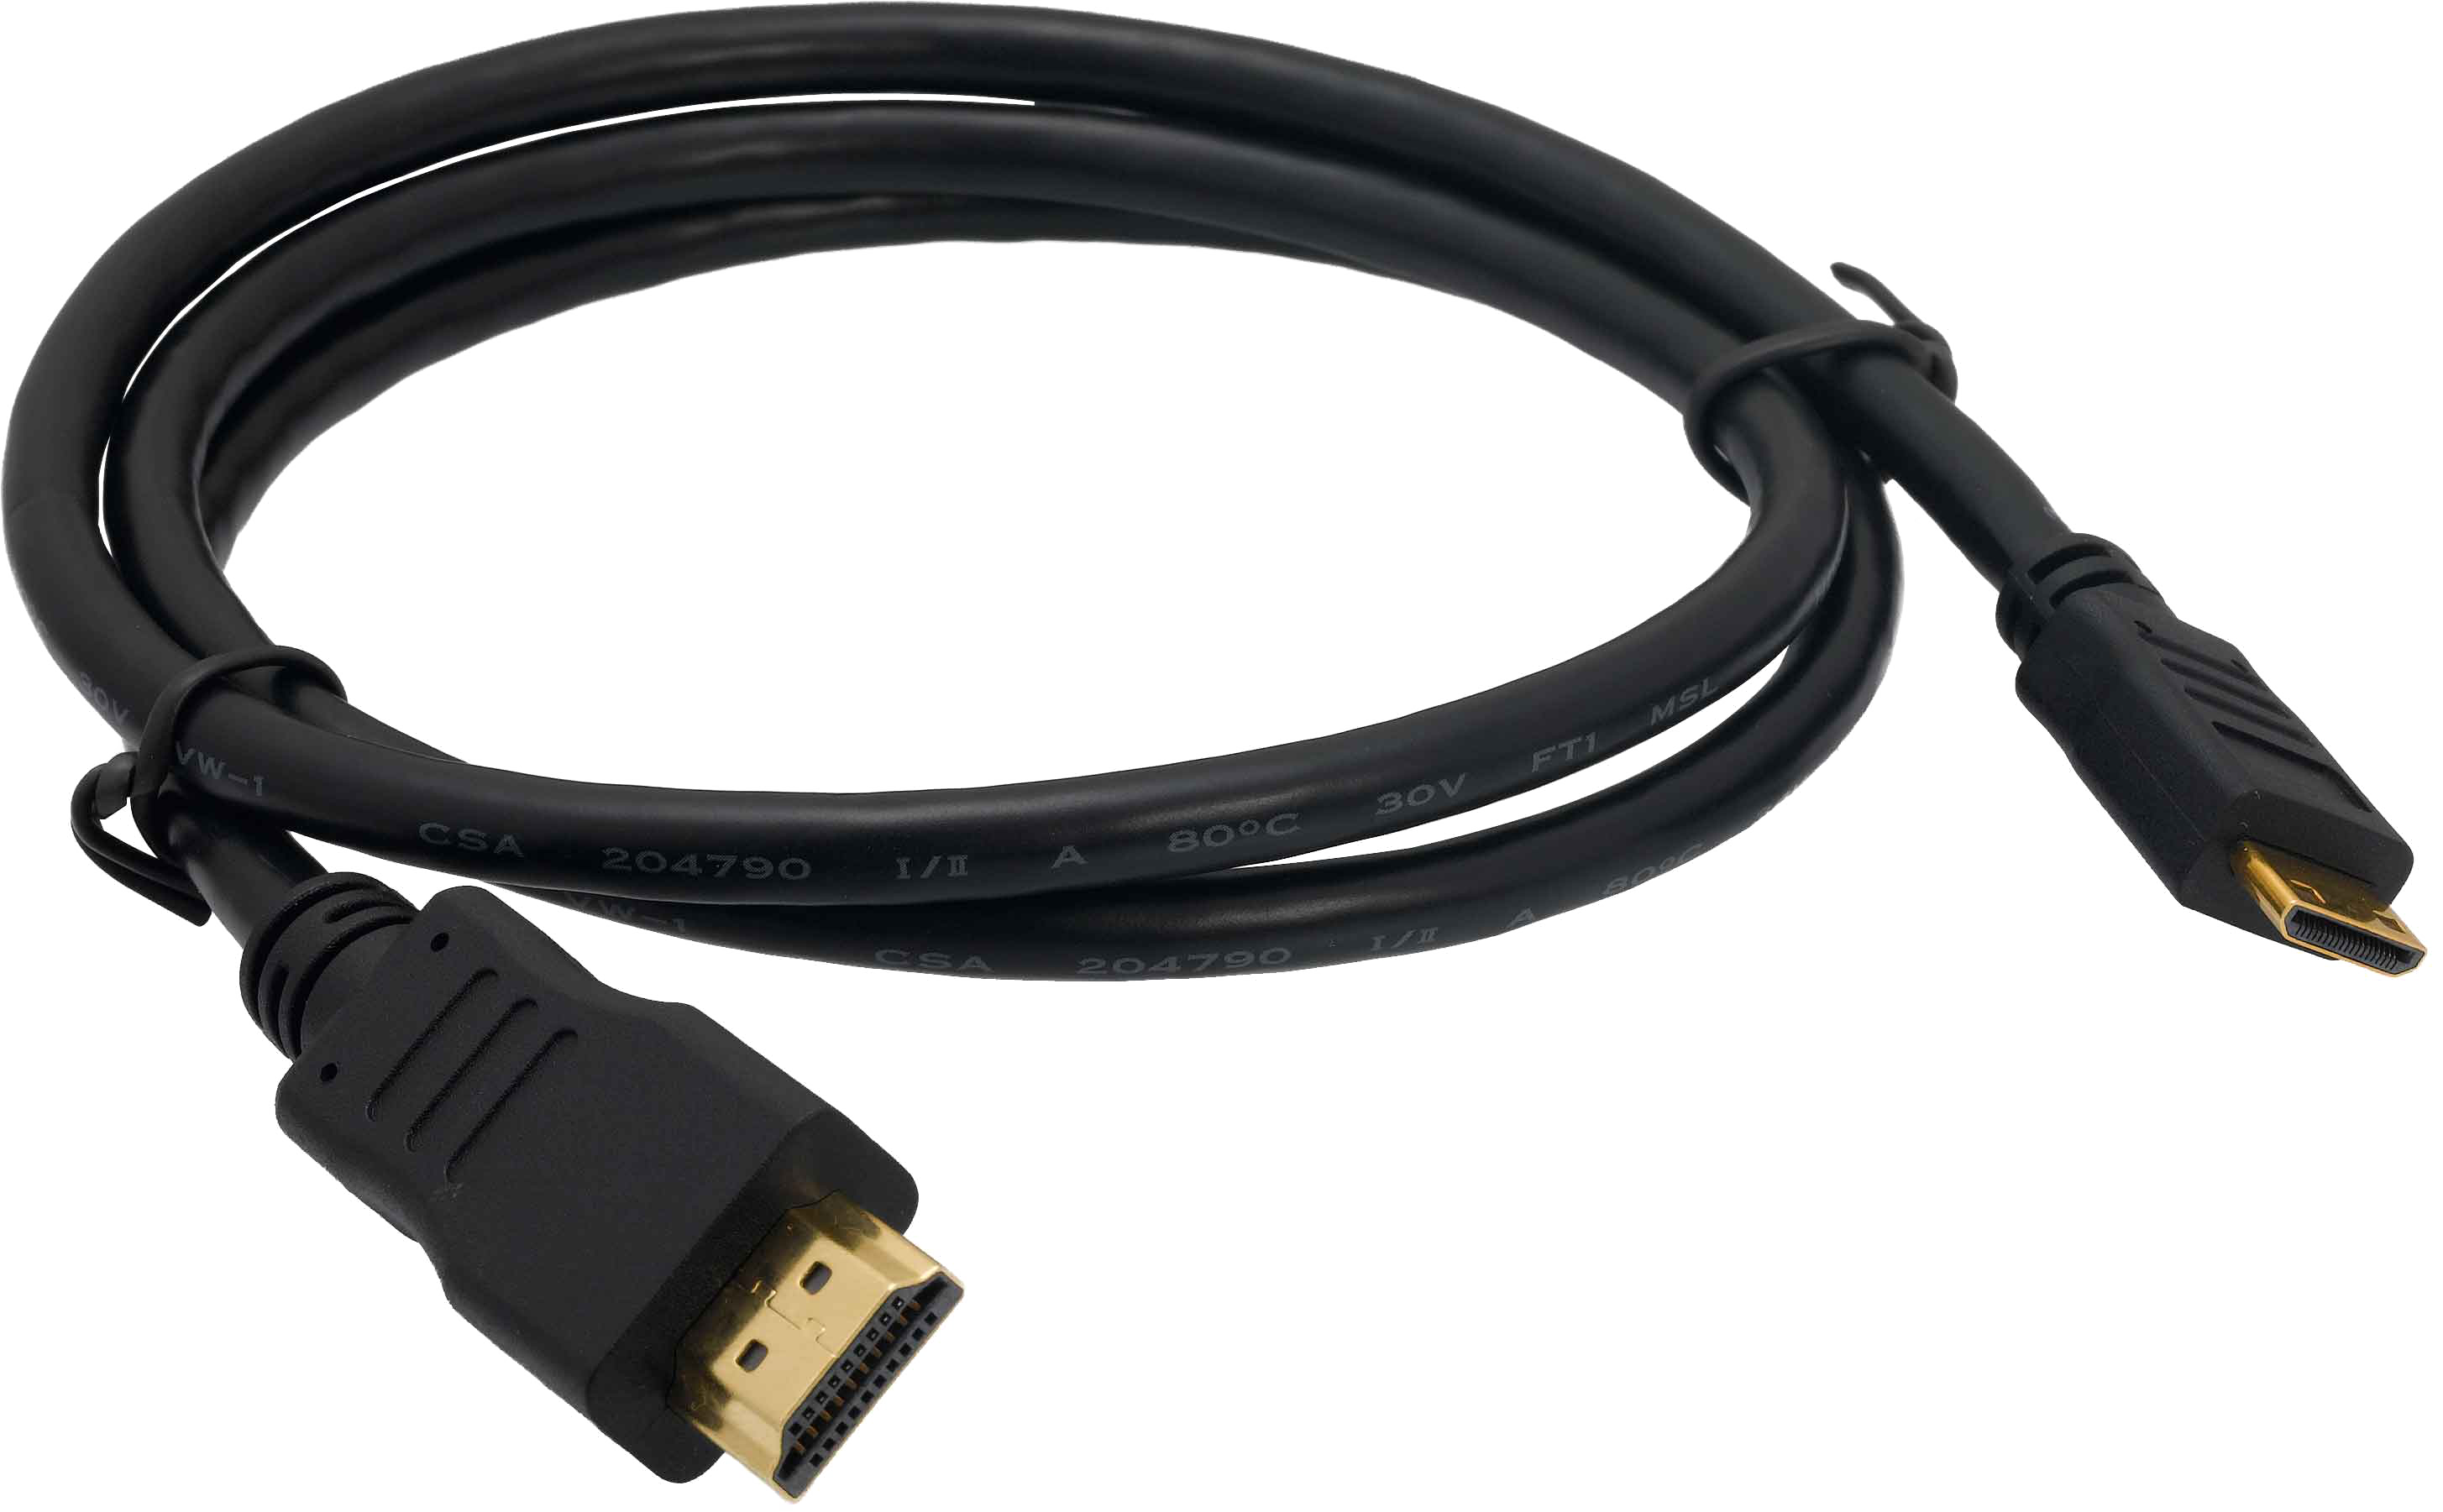 HDMI Cable PNG Images Transparent Free Download.